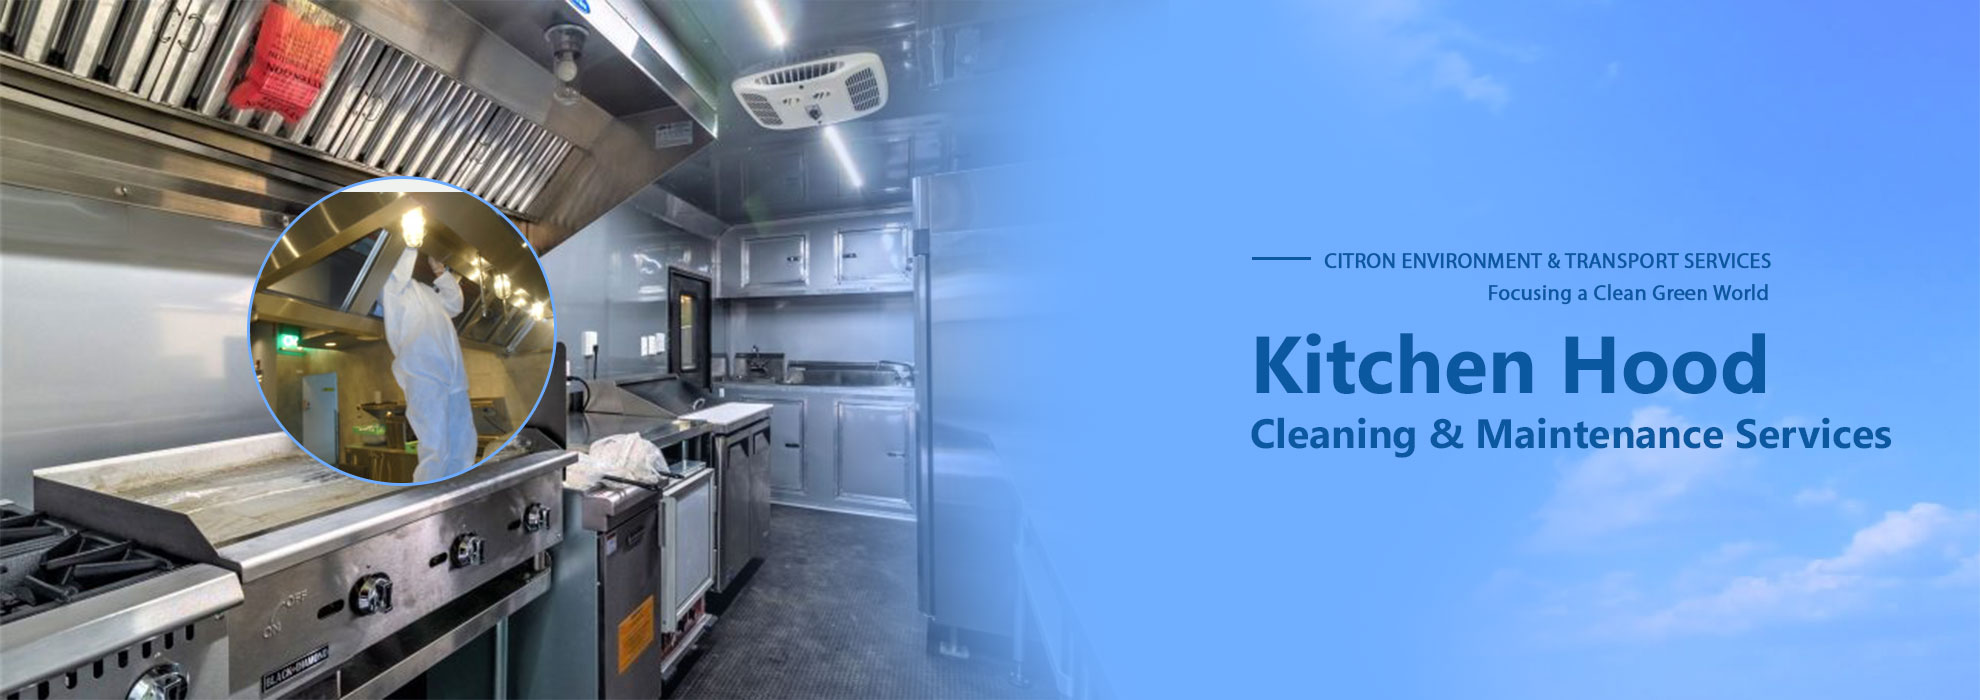 Kitchen Hood Cleaning services in Abu Dhabi